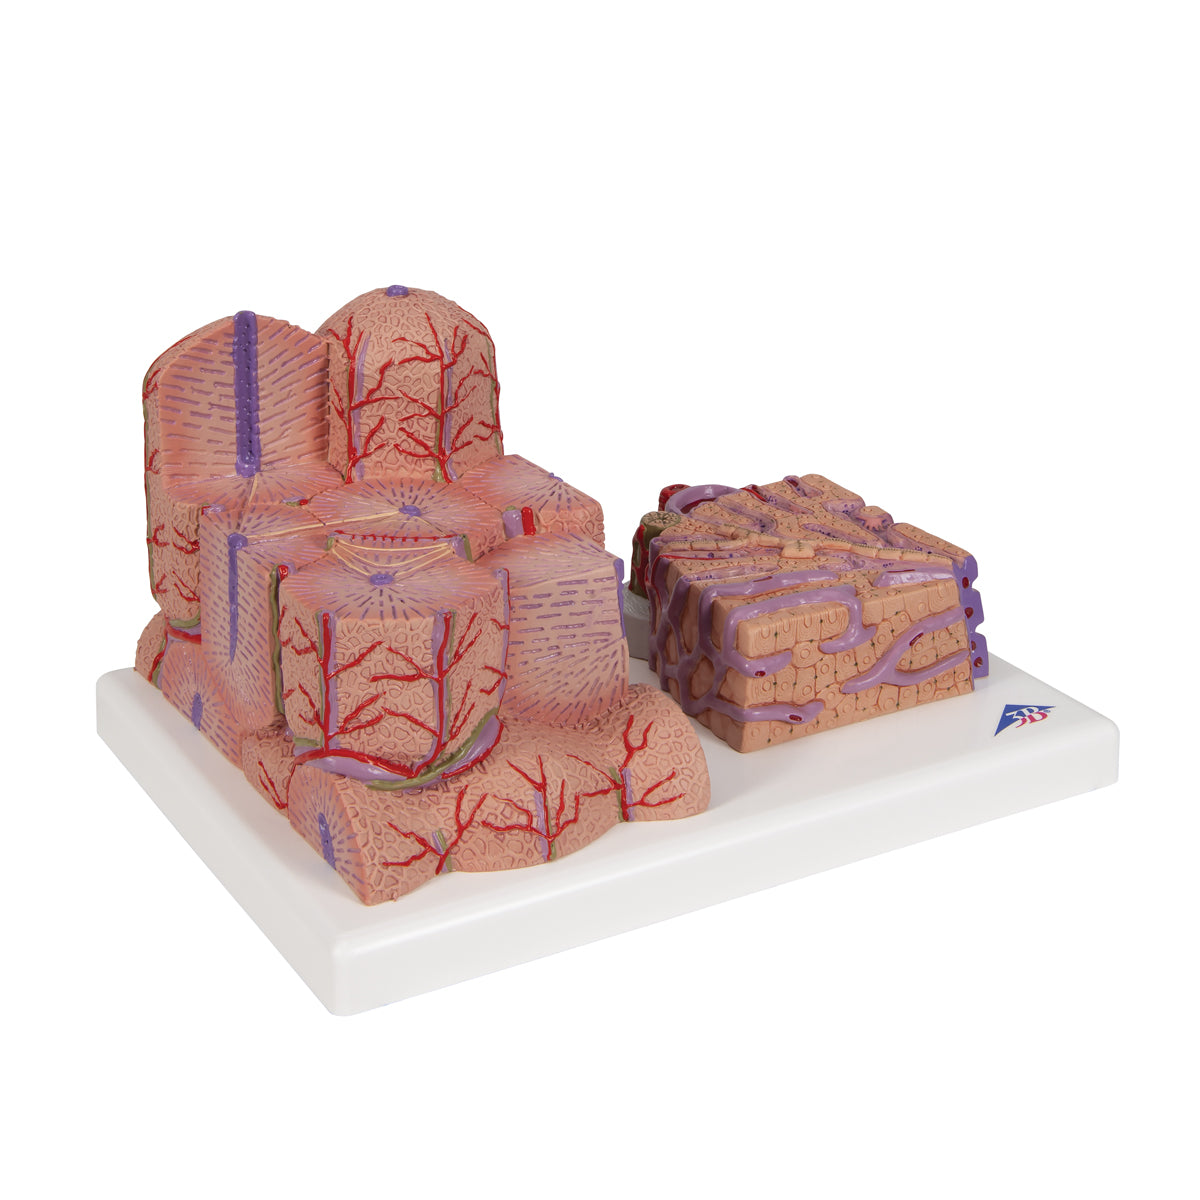 Detailed model of the liver tissue and blood vessels in a microscopic perspective